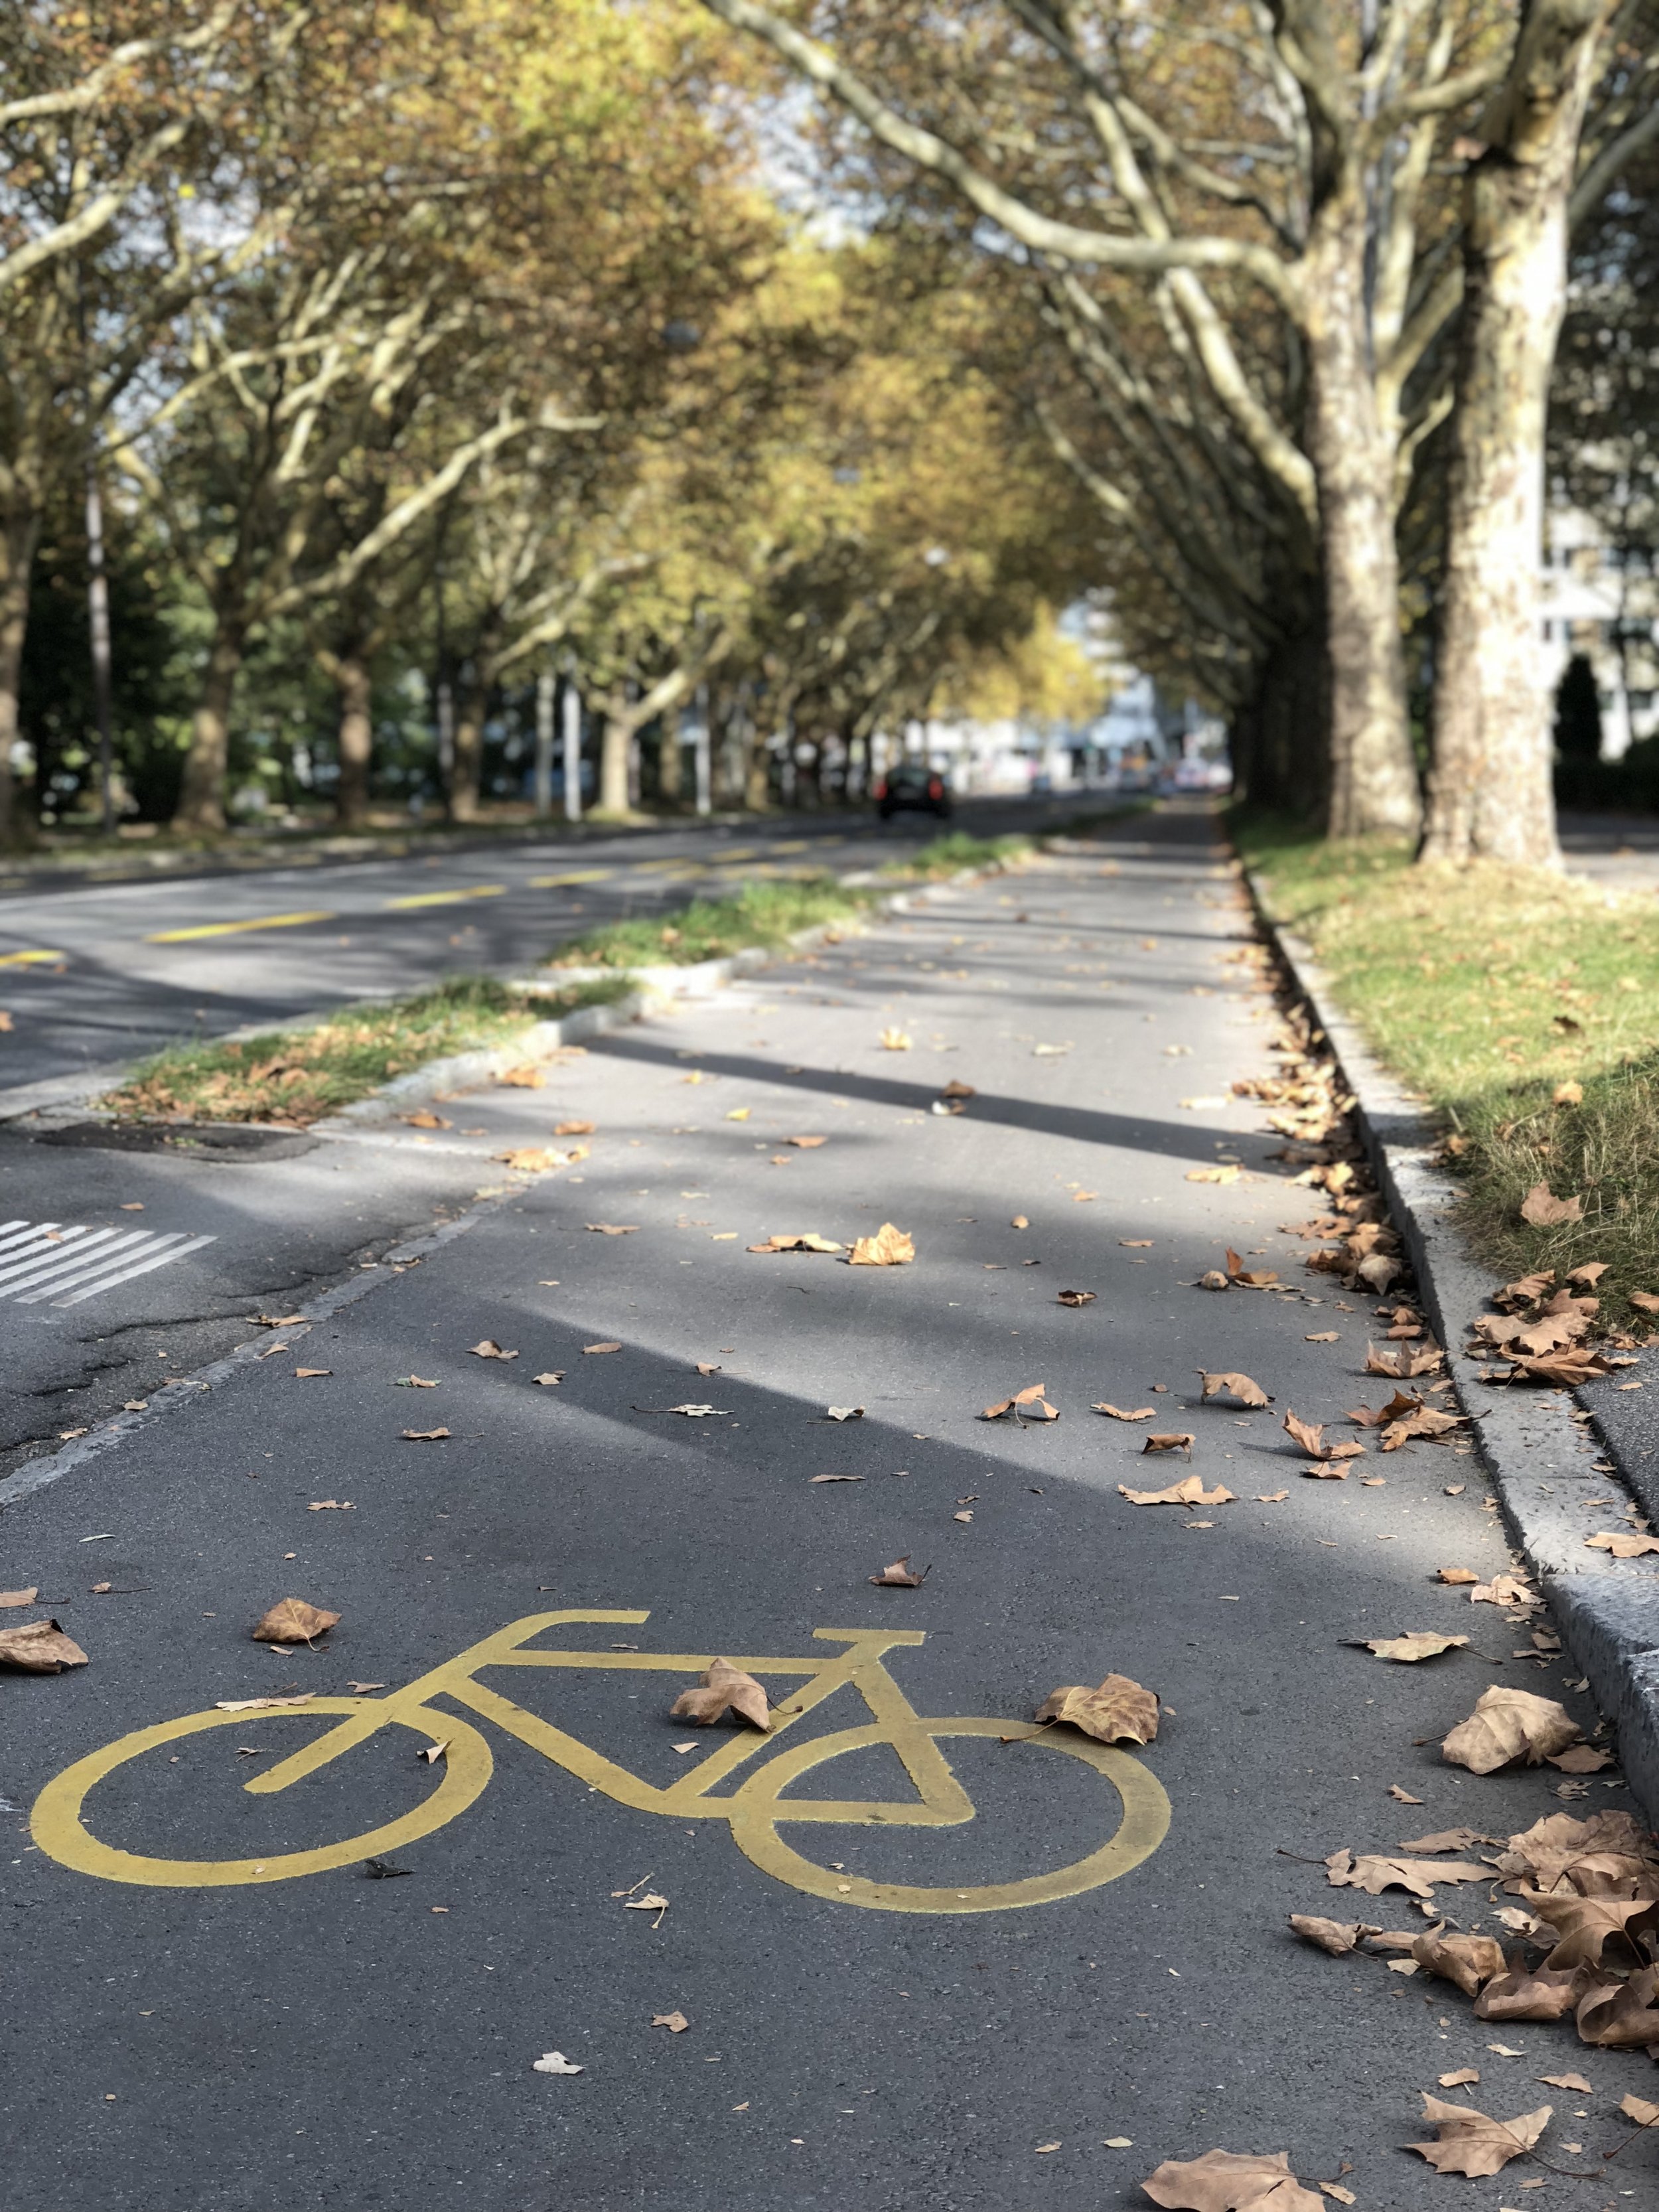  Traditionally, painted bicycle lanes have comprised the majority of Swiss bike infrastructure, but these are insufficient to guarantee safety along major corridors. The newly implemented cycle track on Velo-Hauptroute Wankdorf should become the stan